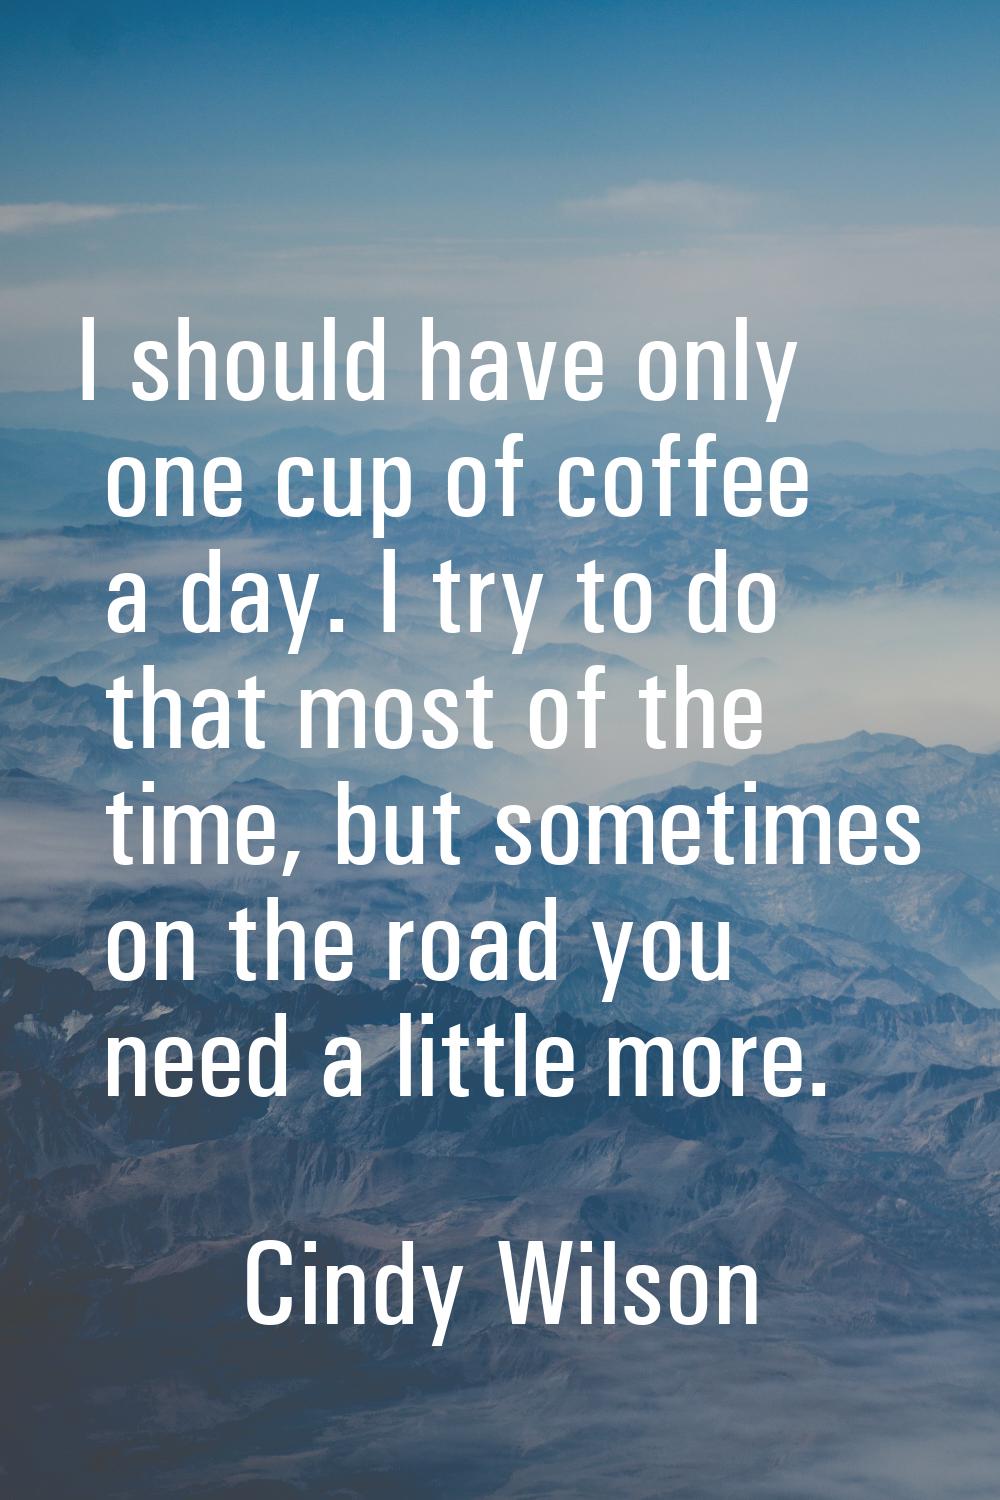 I should have only one cup of coffee a day. I try to do that most of the time, but sometimes on the